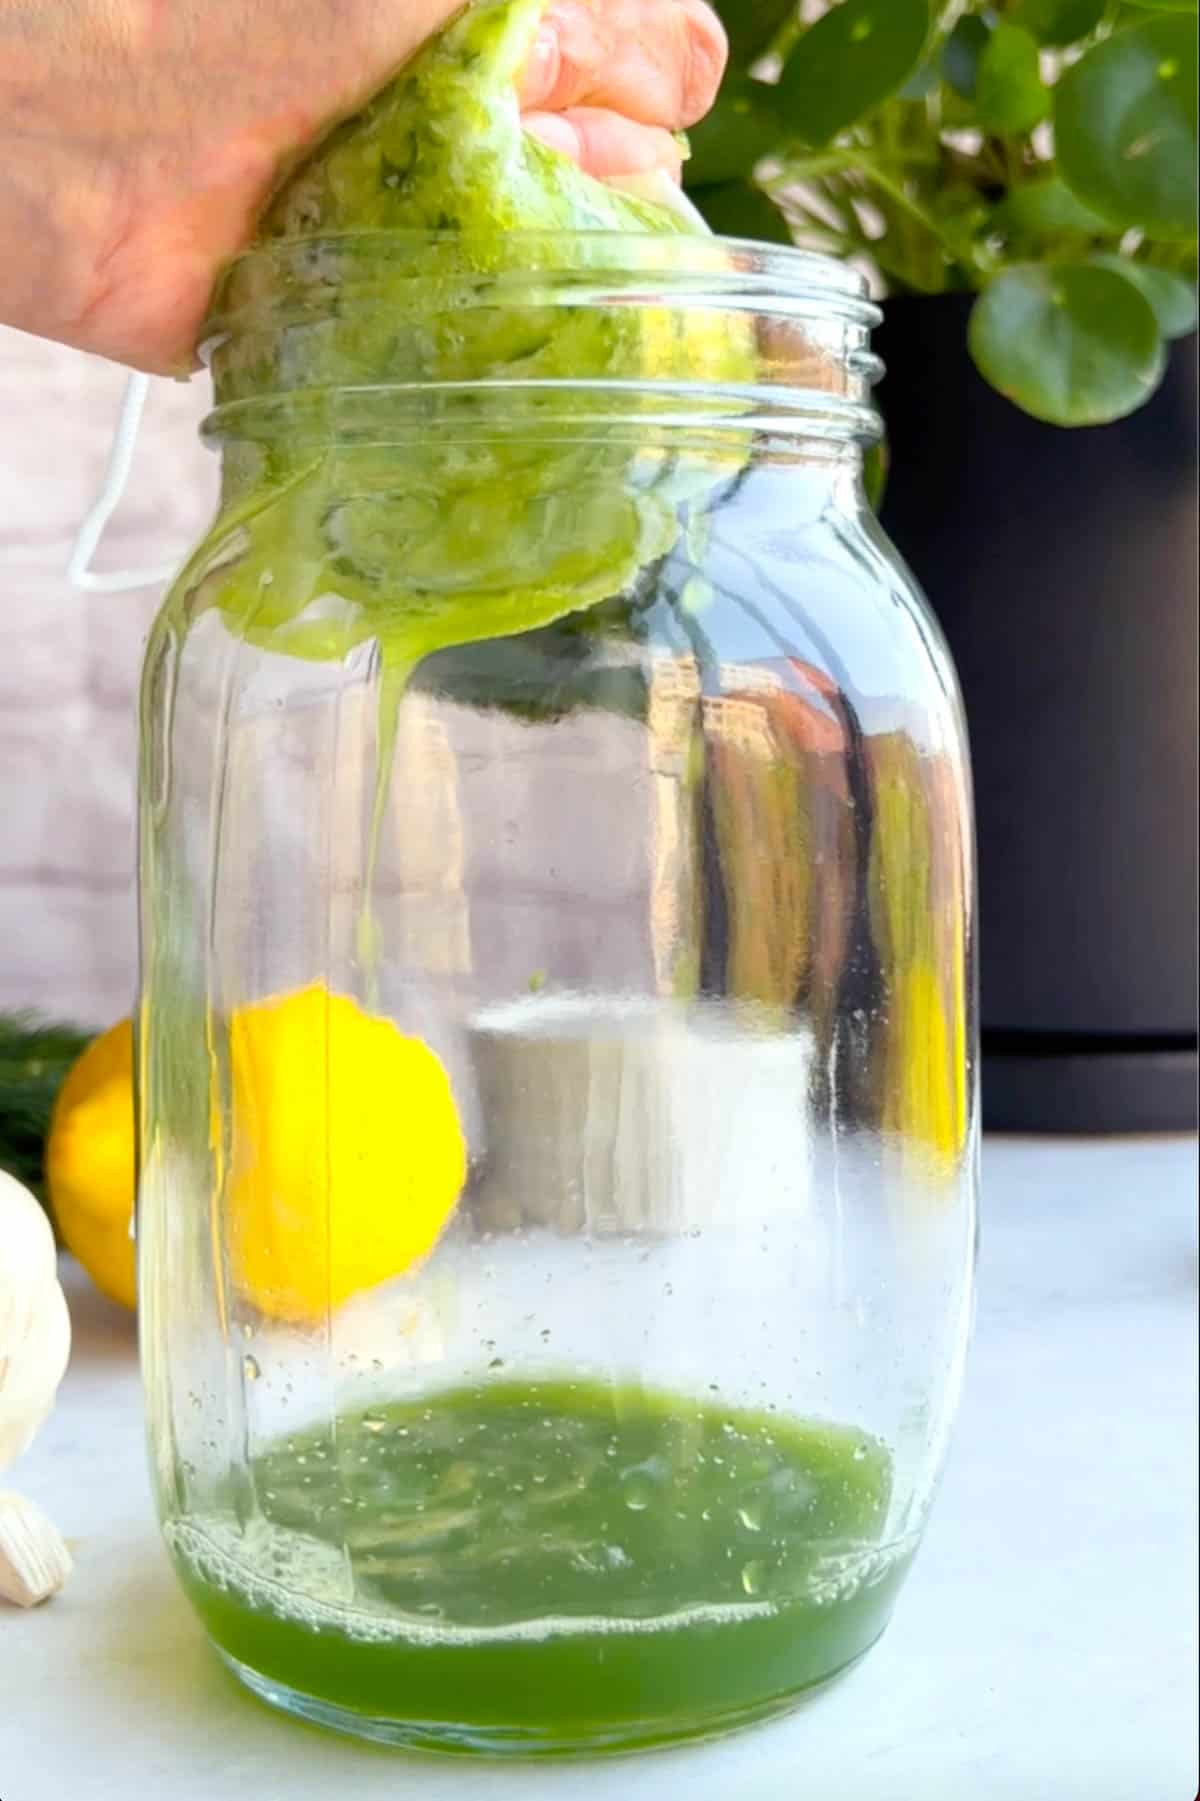 Grated cucumber in a nut bag being squeezed above a mason jar with green liquid draining into the jar.